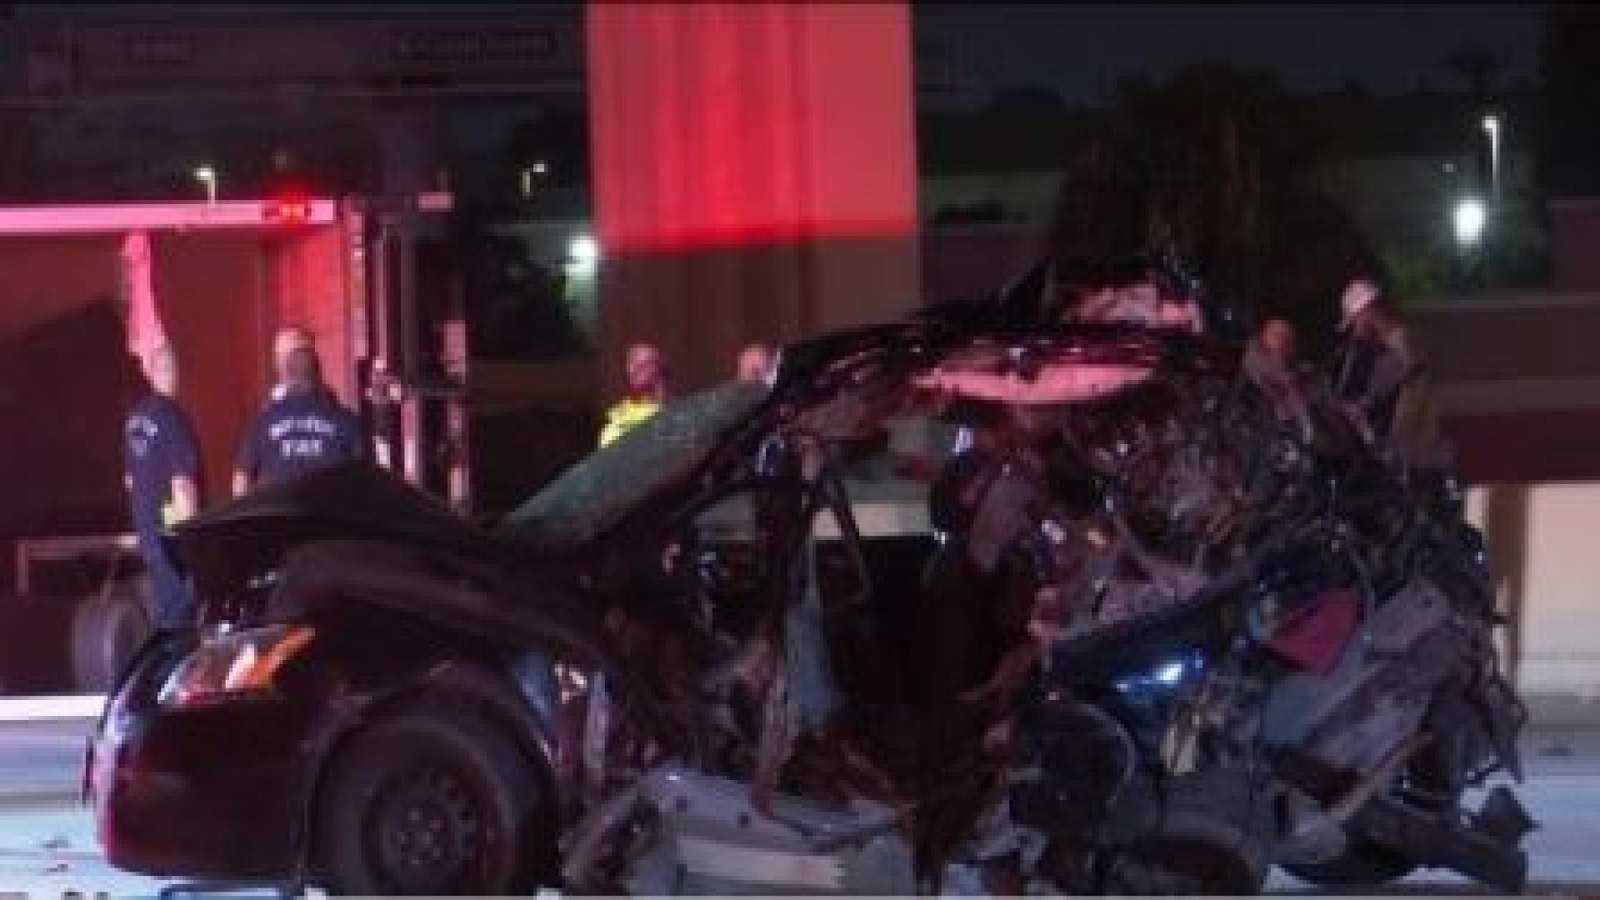 Good Samaritan attempts to help 2 women trapped in car after crash in NW Houston, police say